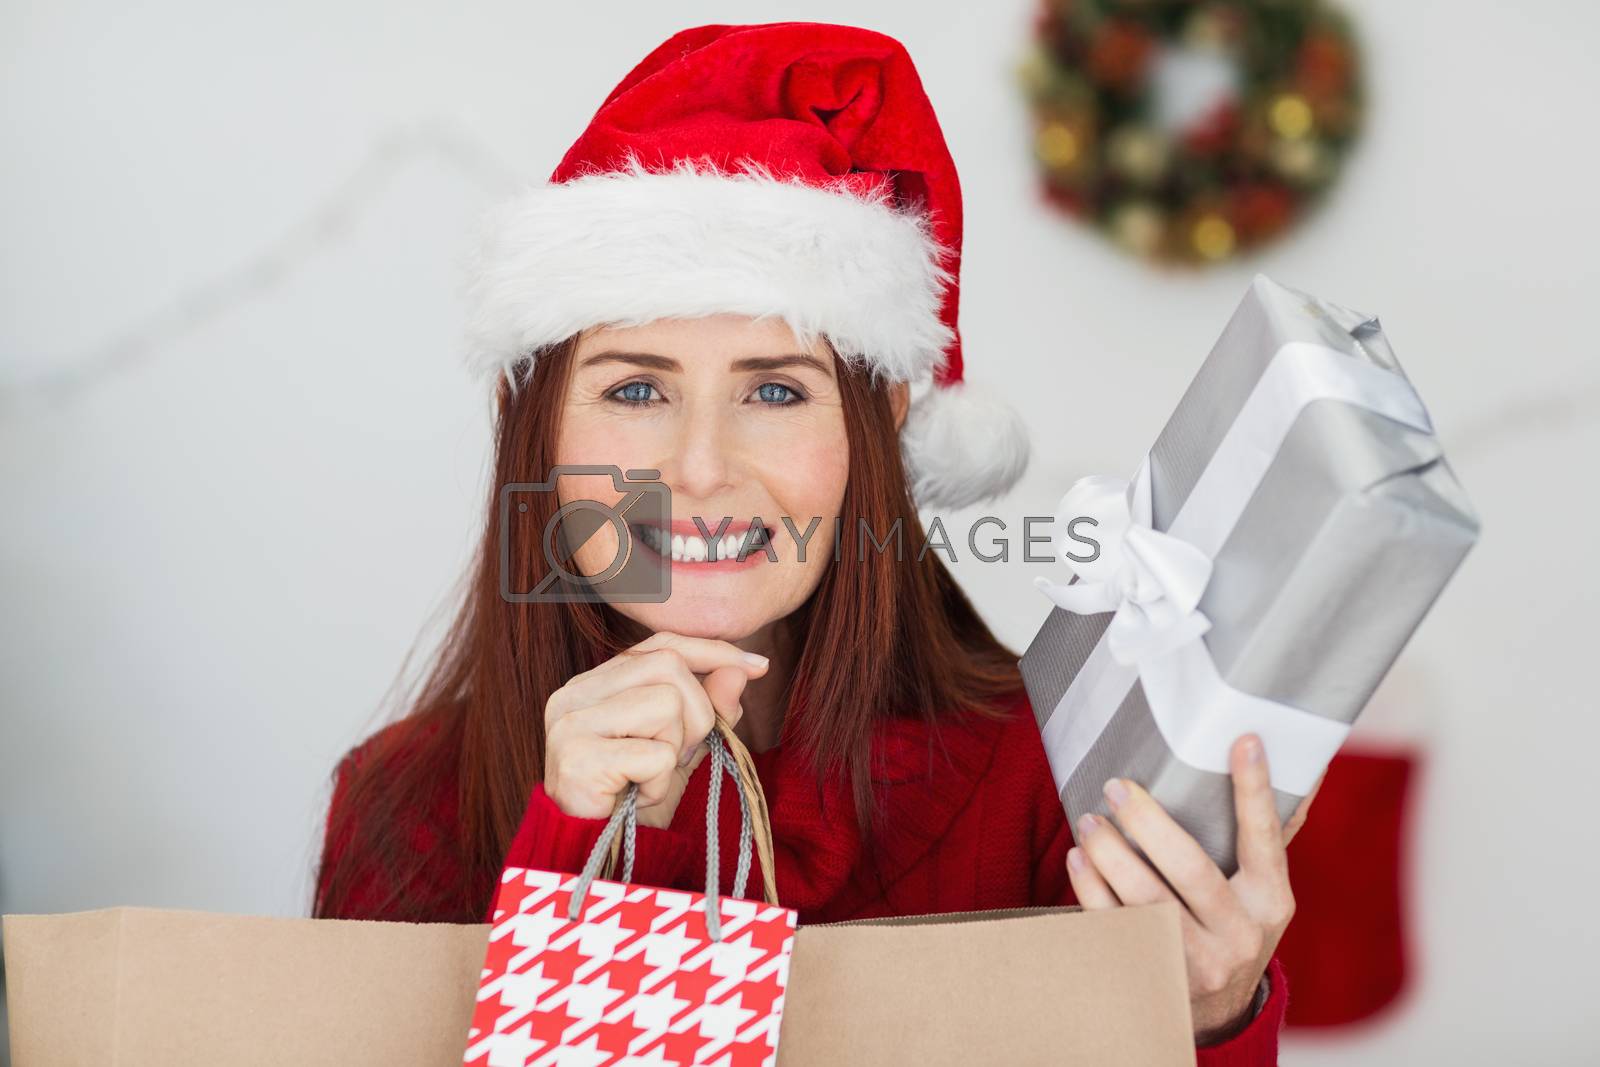 Royalty free image of Festive redhead holding christmas gifts by Wavebreakmedia